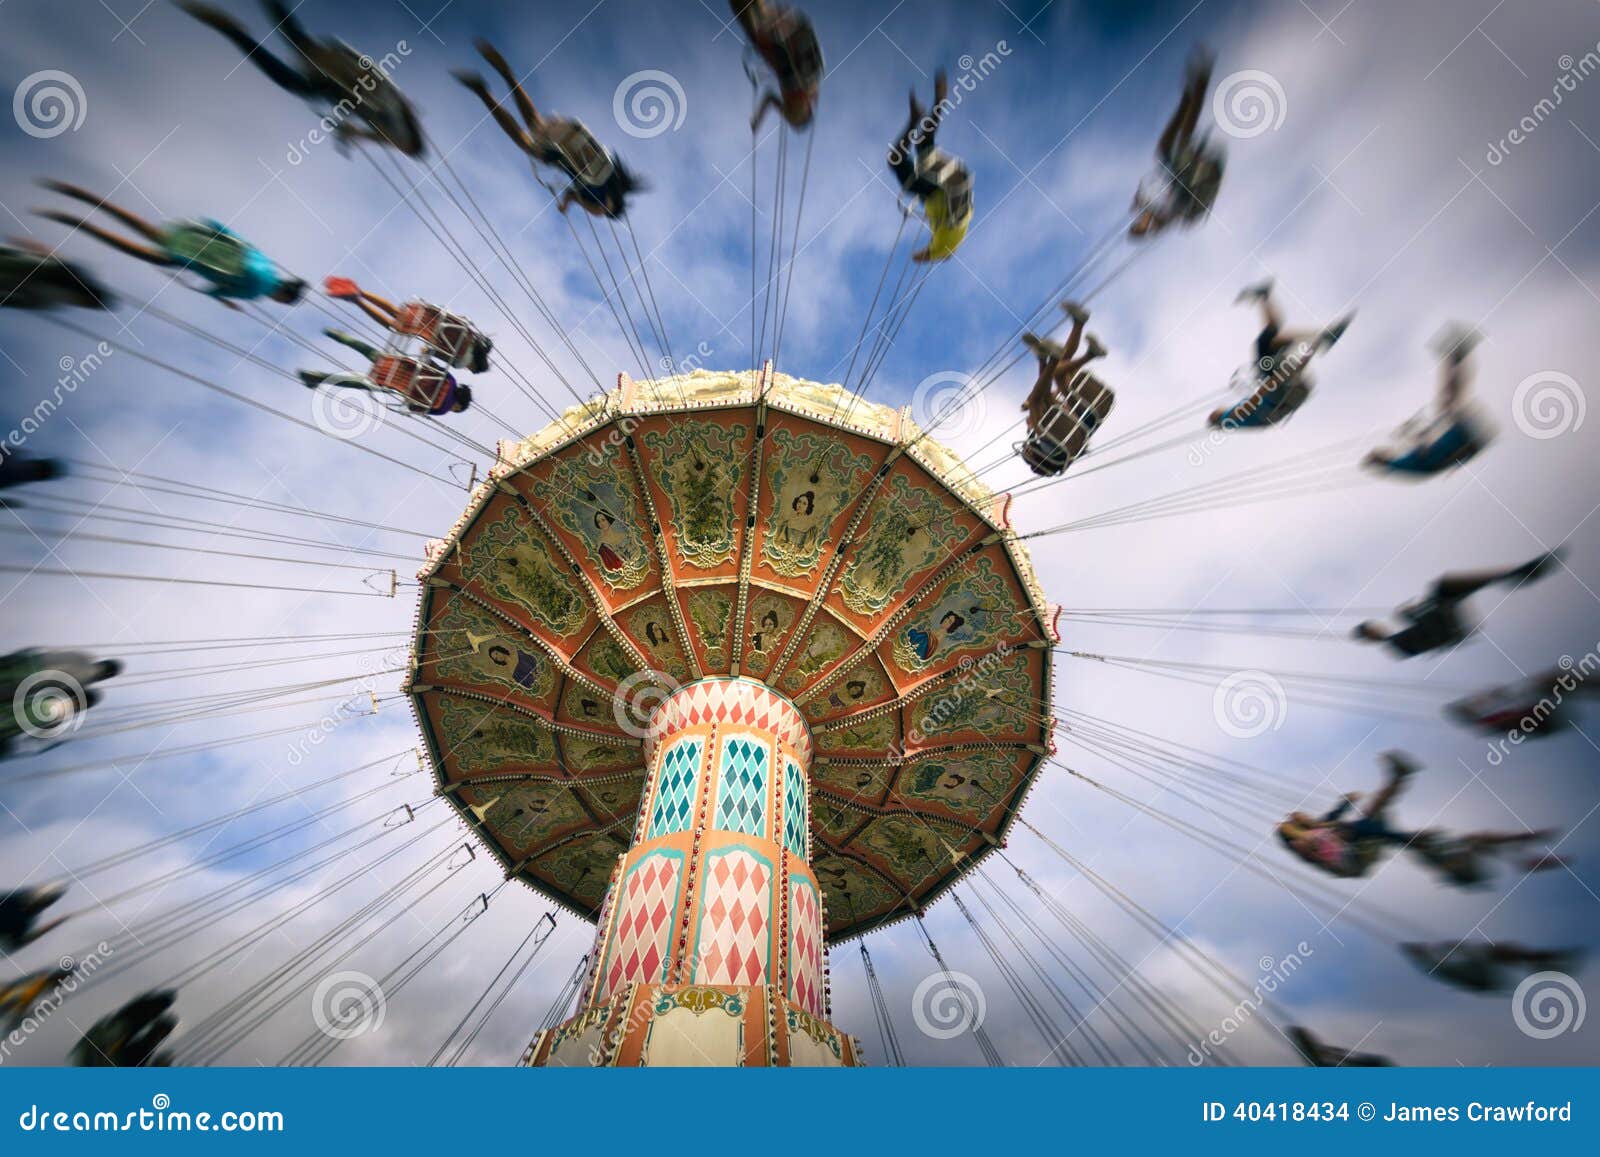 Spinning Vintage Swing Ride Stock Photo - Image of blur, carnival